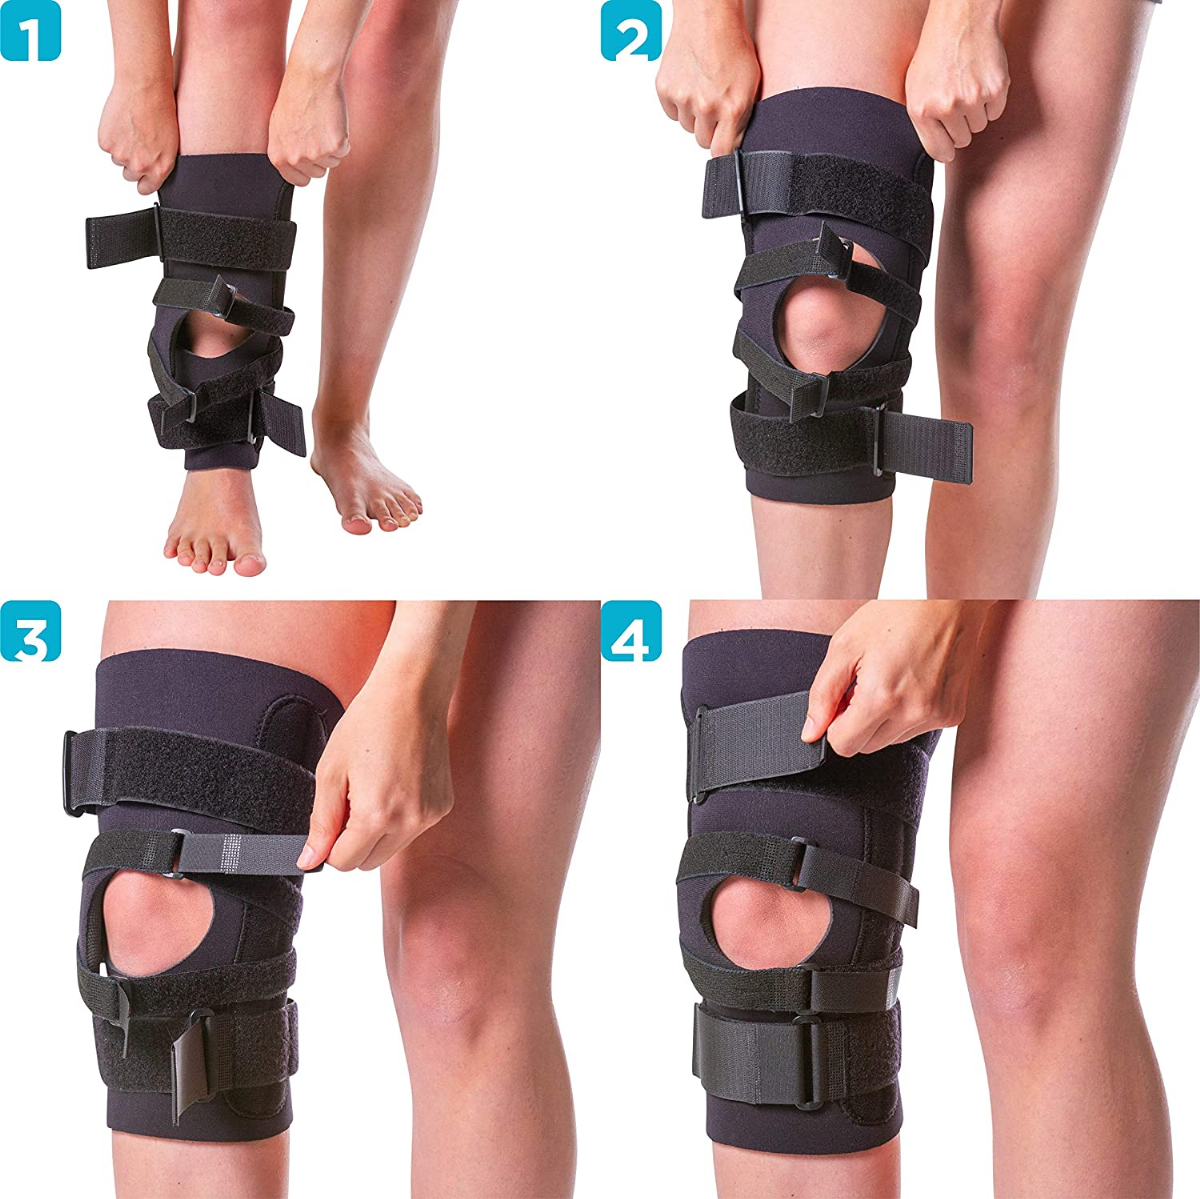 J Patella Stabilizing Knee Brace  Medial or Lateral Support for